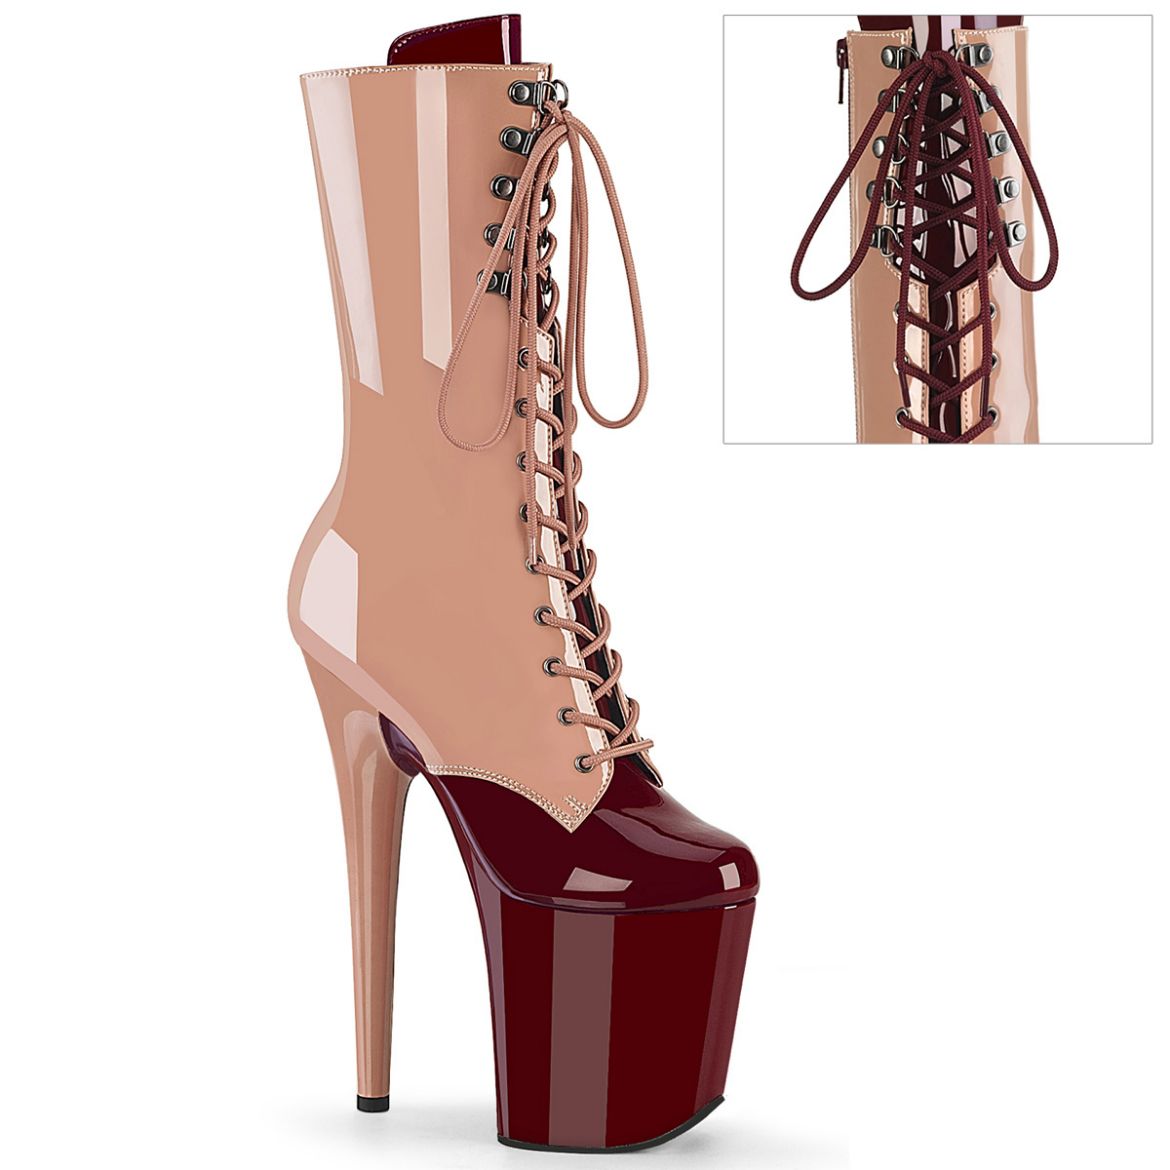 Product image of Pleaser FLAMINGO-1054DC Blush-Burgundy Pat/Blush Burgundy 8 Inch Heel 4 Inch PF Two Tone Lace-Up Mid Calf Boot Side Zip